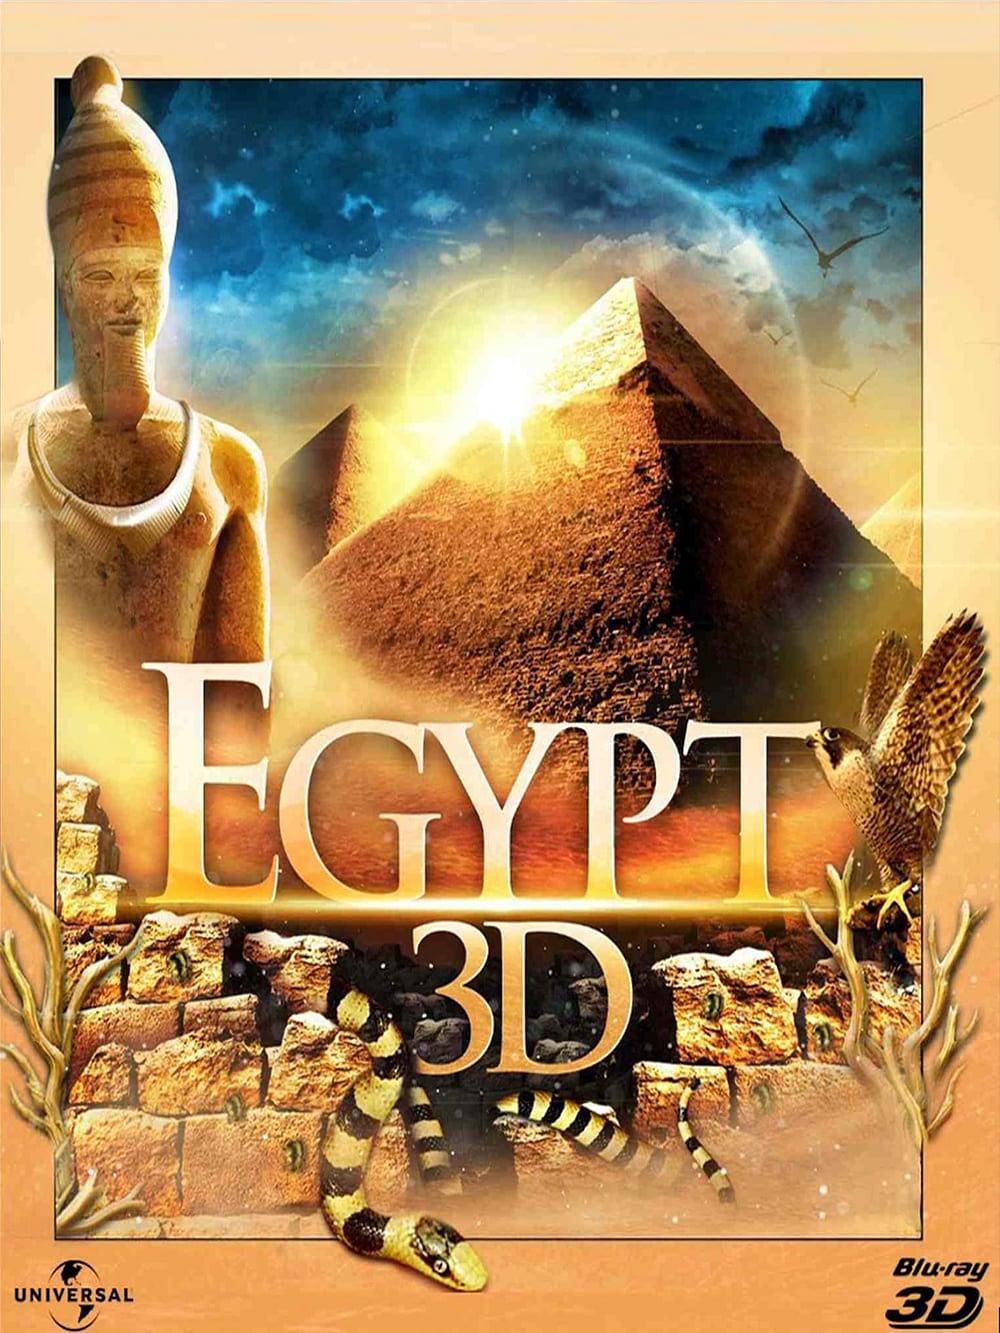  Egypt.2013.1080p.BluRay.x264-PussyFoot 4.37GB-1.png